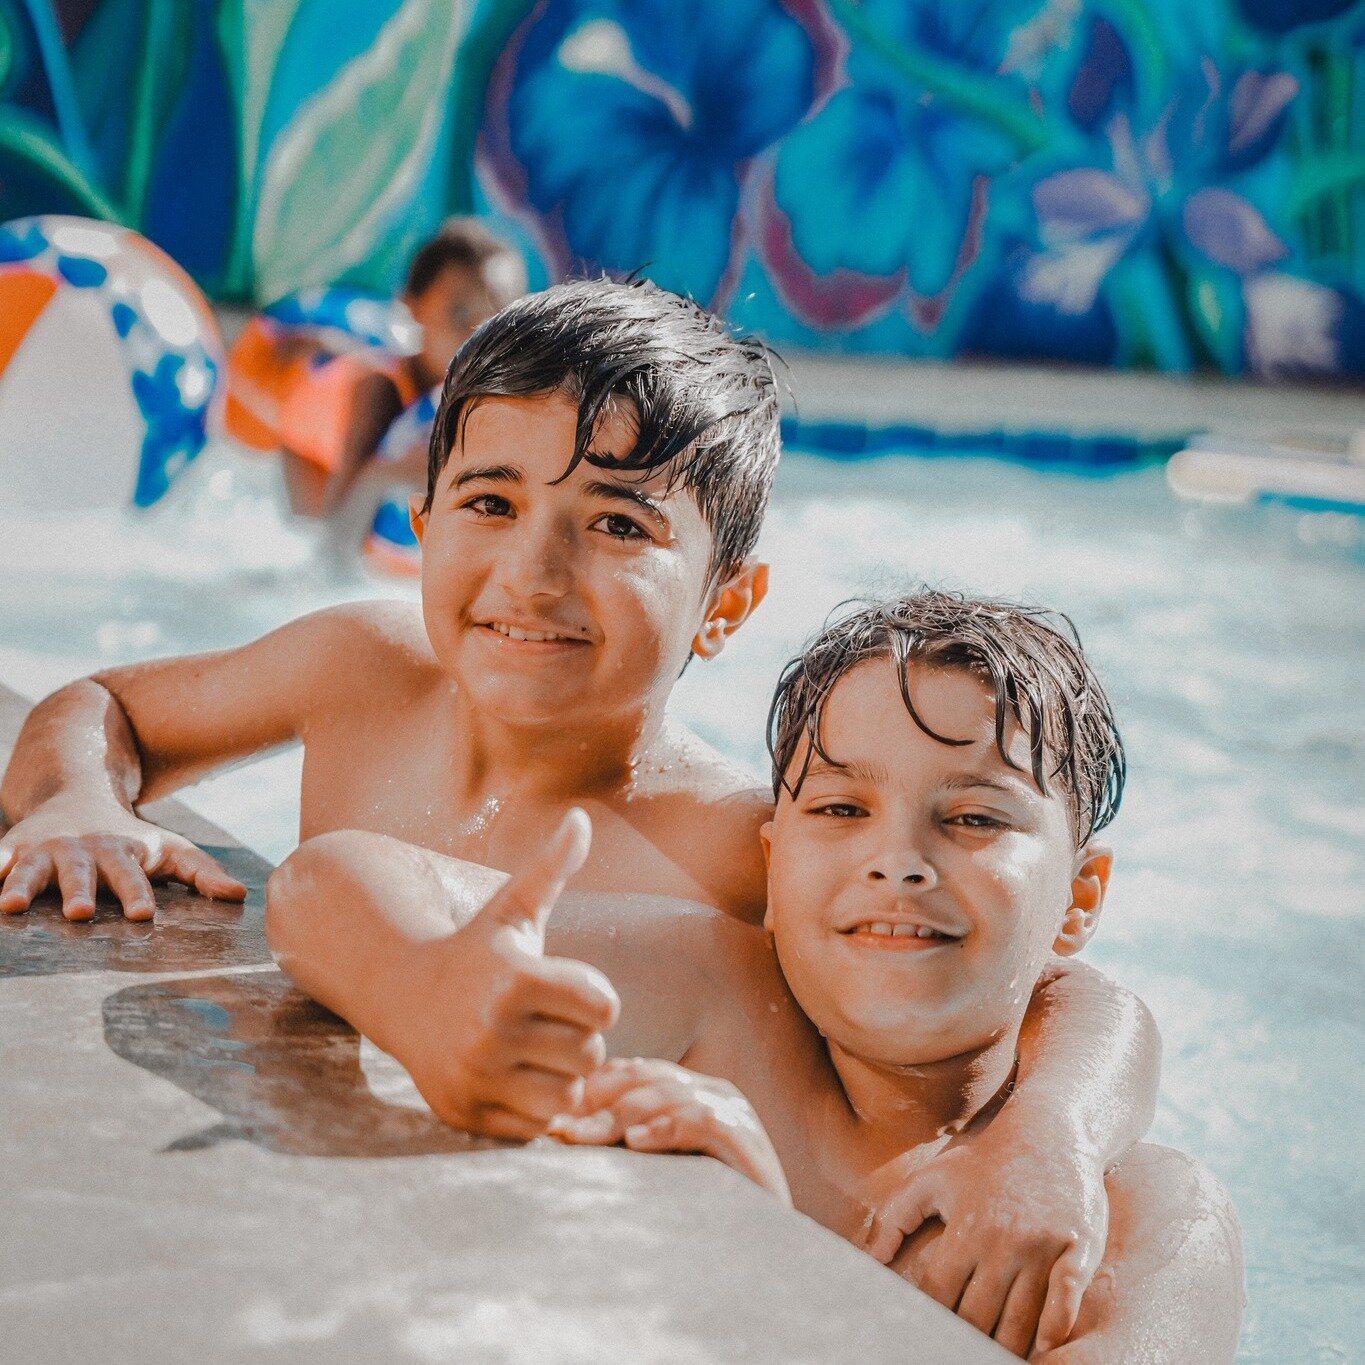 Fun in the Sun! 💙

Last Friday, 62 community members joined together at Thrive's pool to enjoy the water and share some food. What a beautiful summery Friday afternoon! Thanks to @ksps_pbs , @valleyreallife, and @poolworldinc for helping us host the